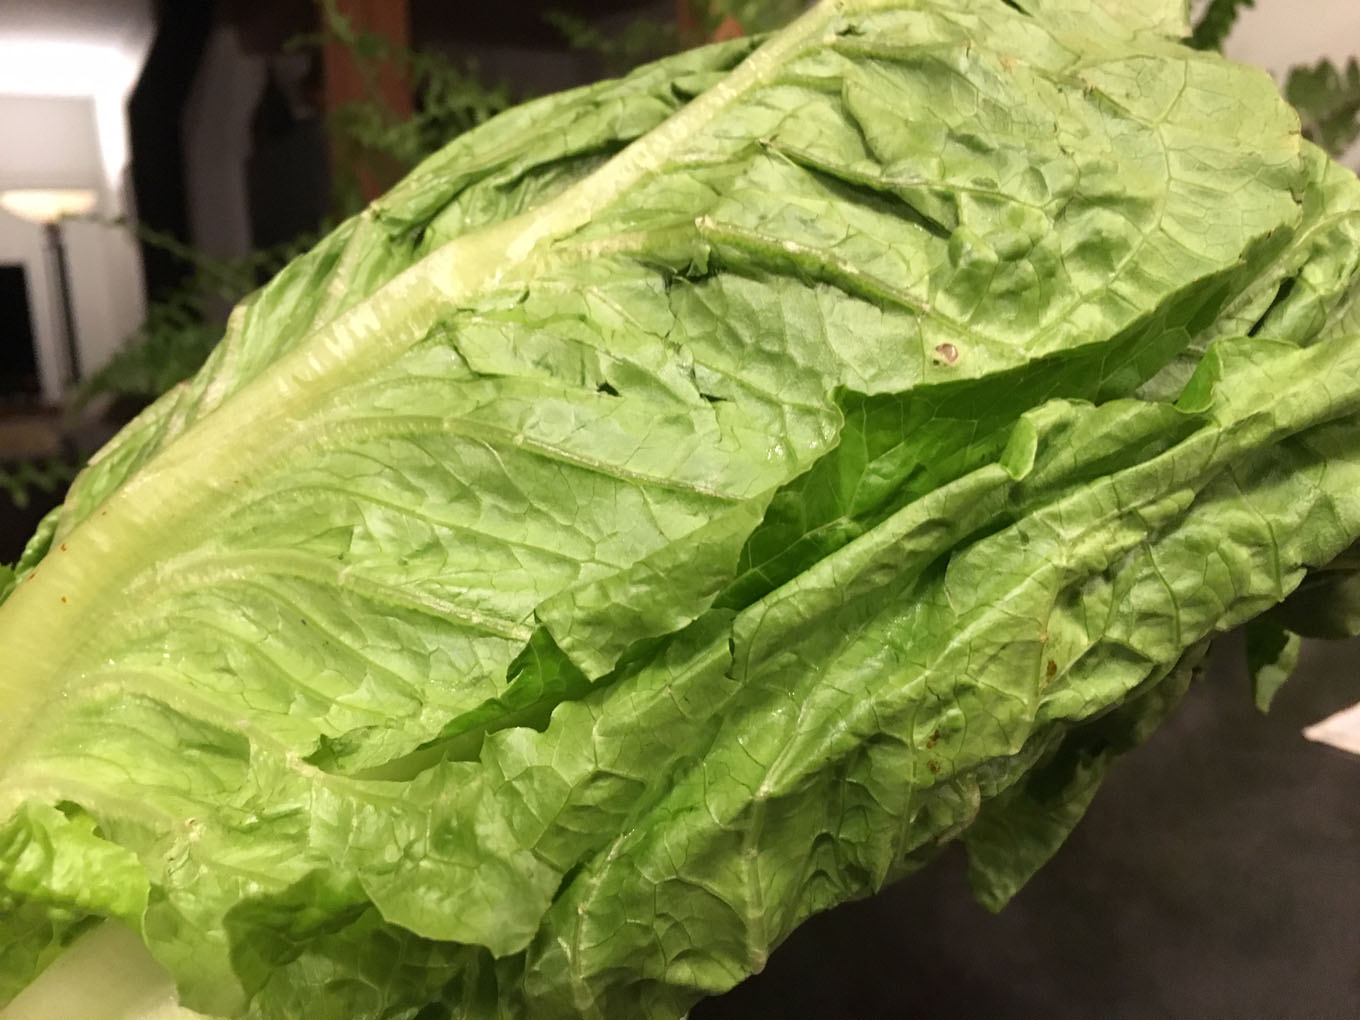 Health Canada says outbreak of E. coli infections linked to romaine lettuce